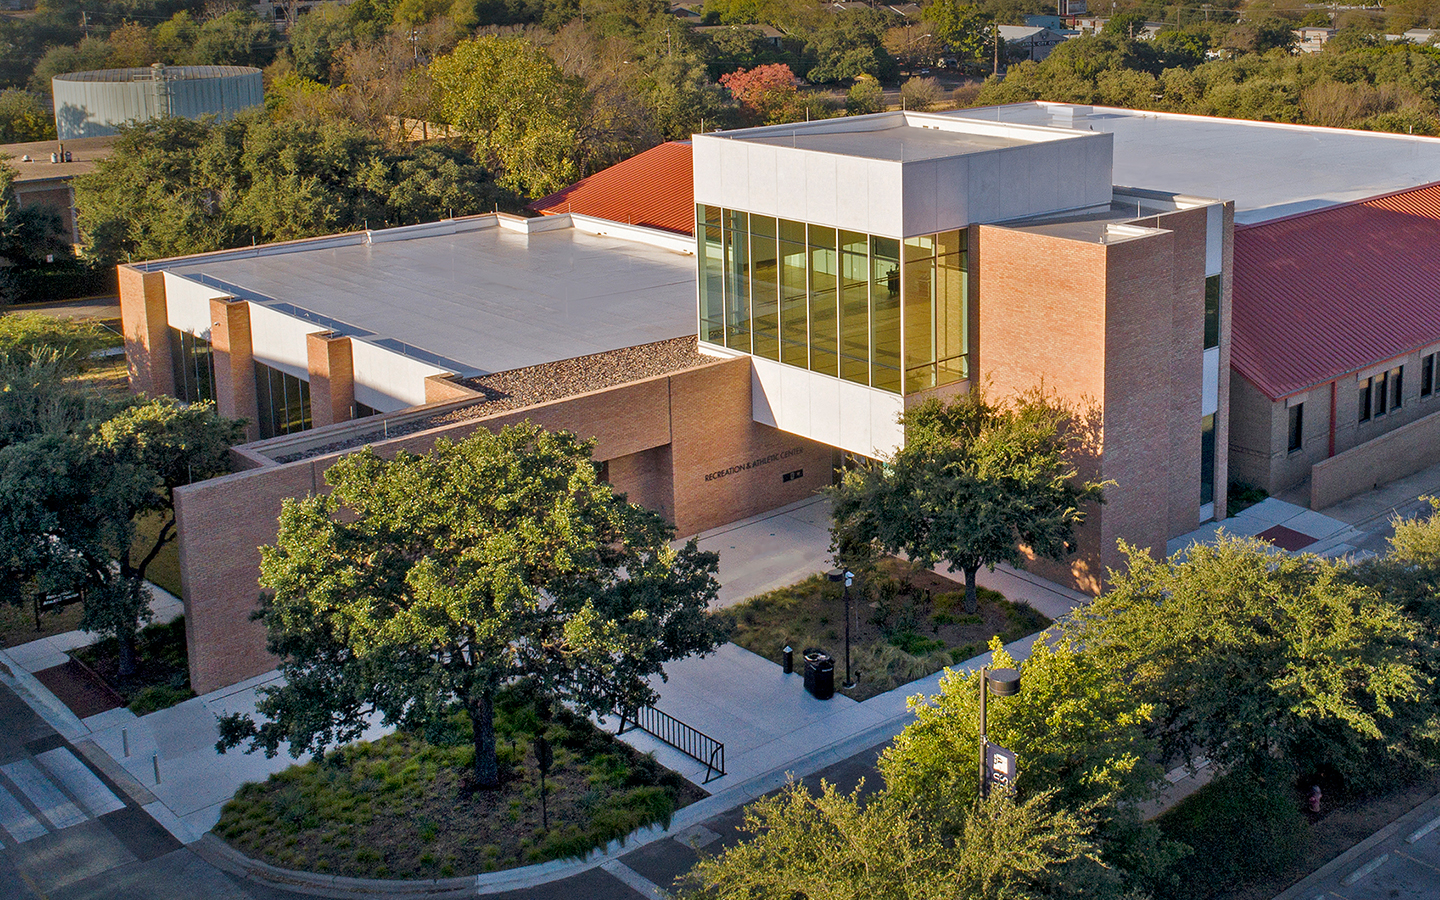 Birds eye view of Recreation and Athletic Center by Specht Novak Architects to showcase the new addition complementing the existing structure behind. Shot by Andrea Calo.